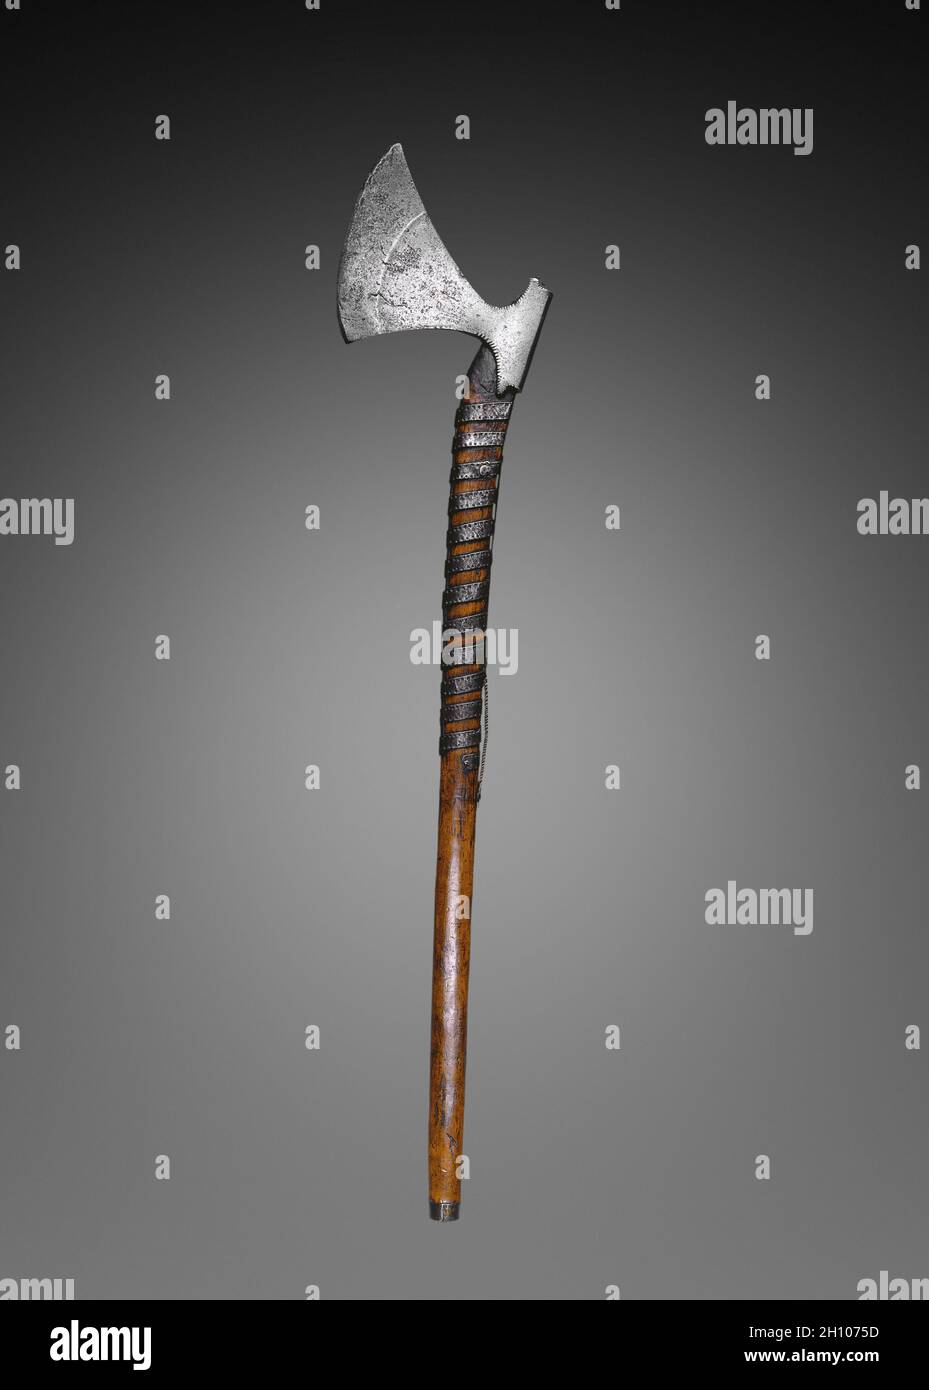 Blade 7 3 8 High Resolution Stock Photography and Images - Alamy